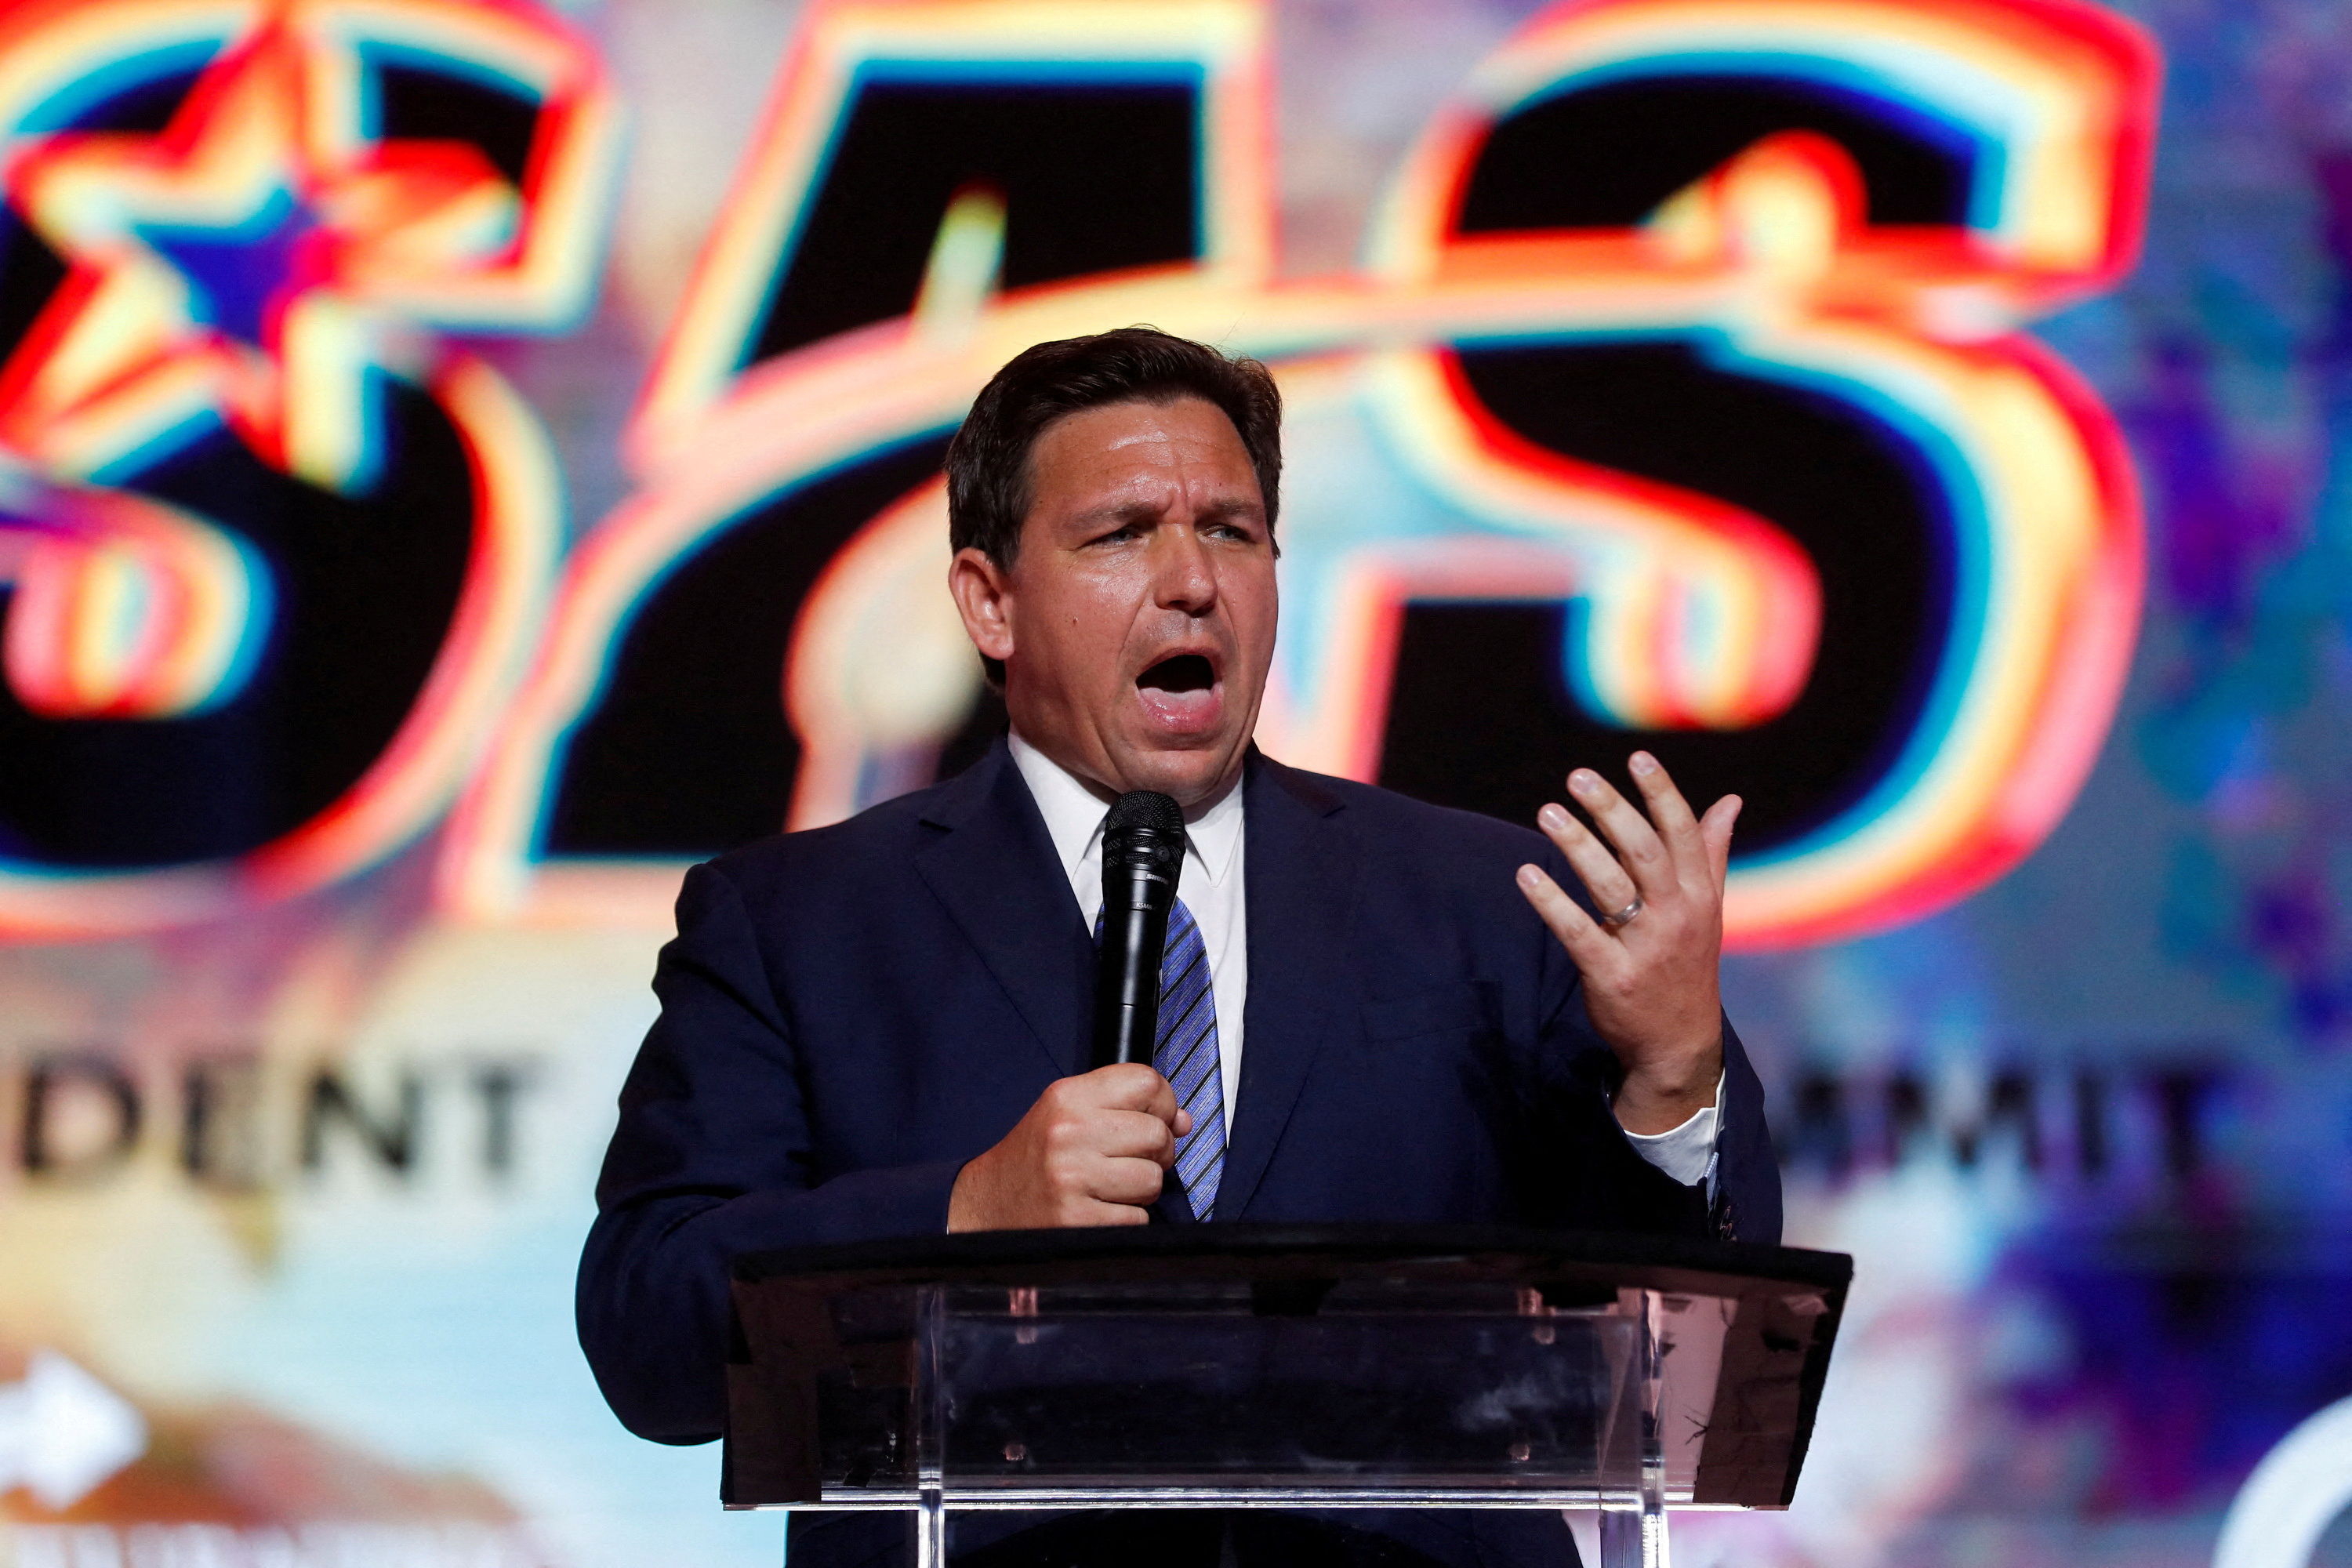 Governor Ron DeSantis has openly opposed this type of treatment of teenagers